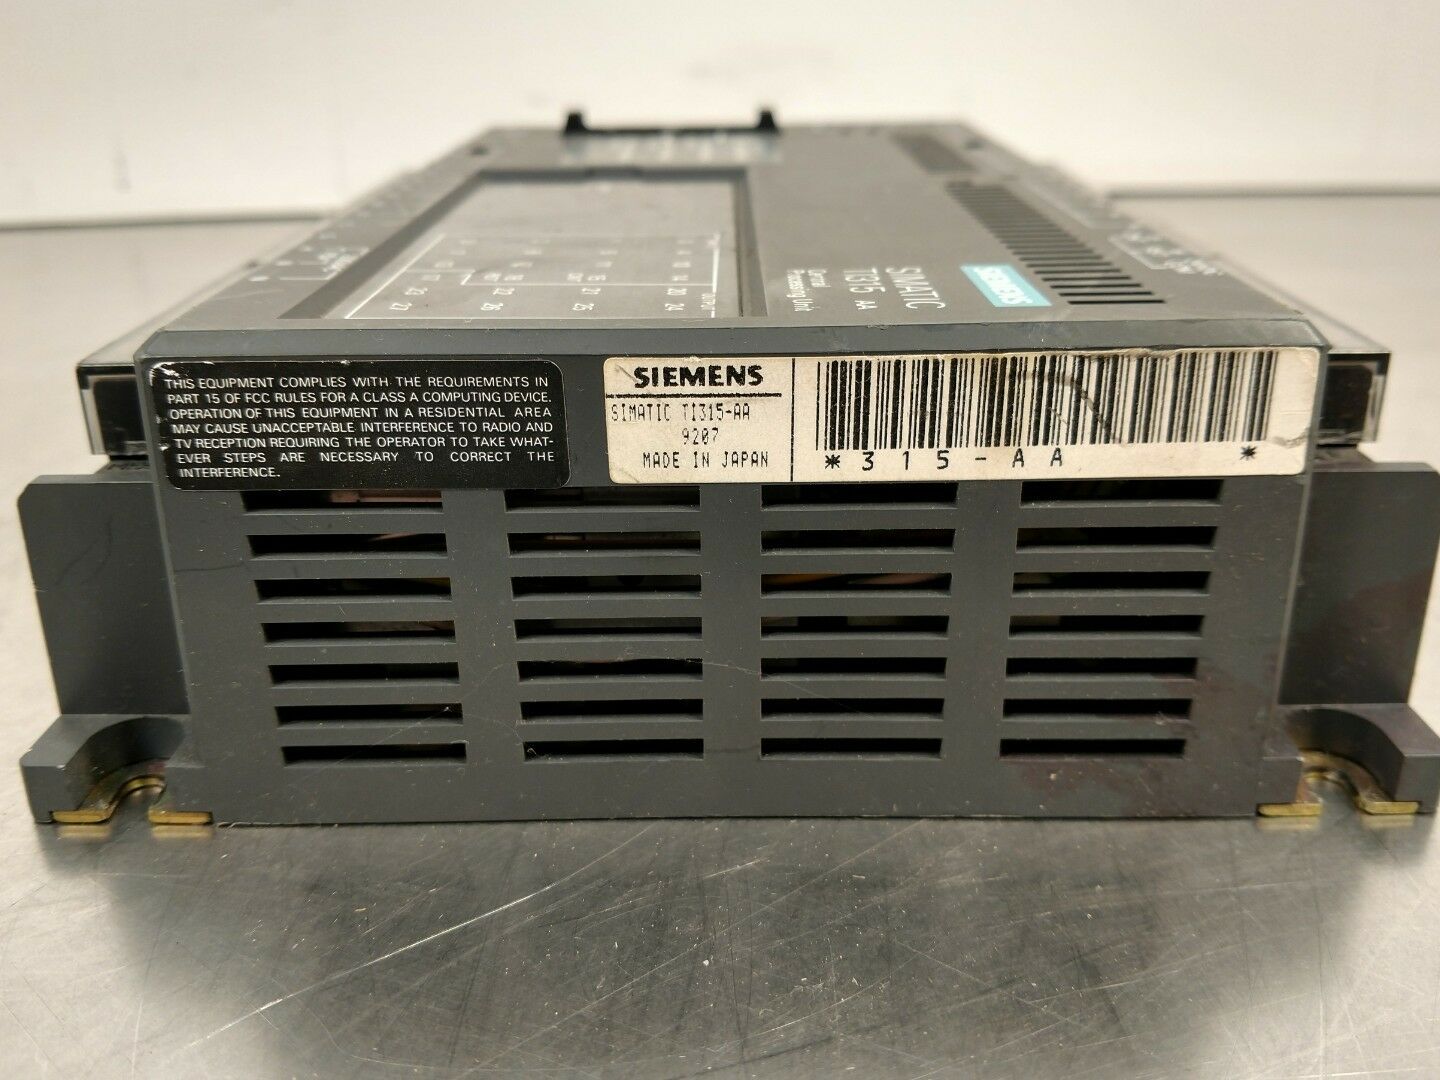 Siemens Simatic TI315 AA Central Processing Unit                            3D-9